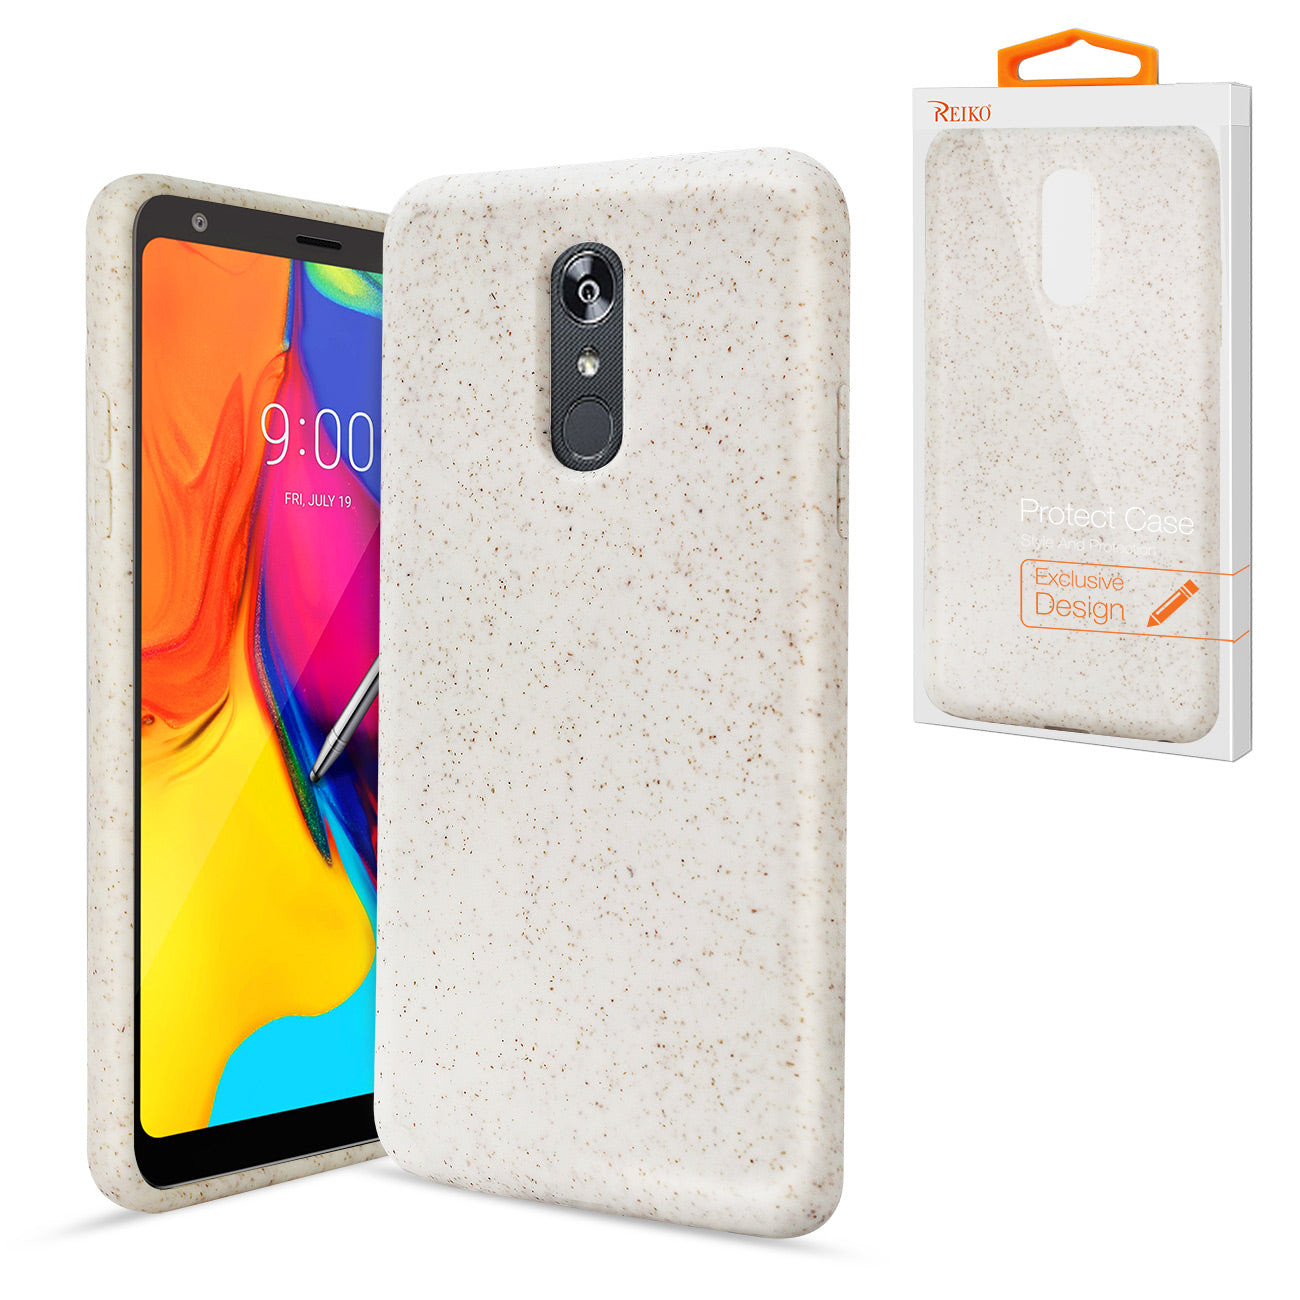 Phone Case Silicone Wheat Bran Material LG Stylo 5 White Color